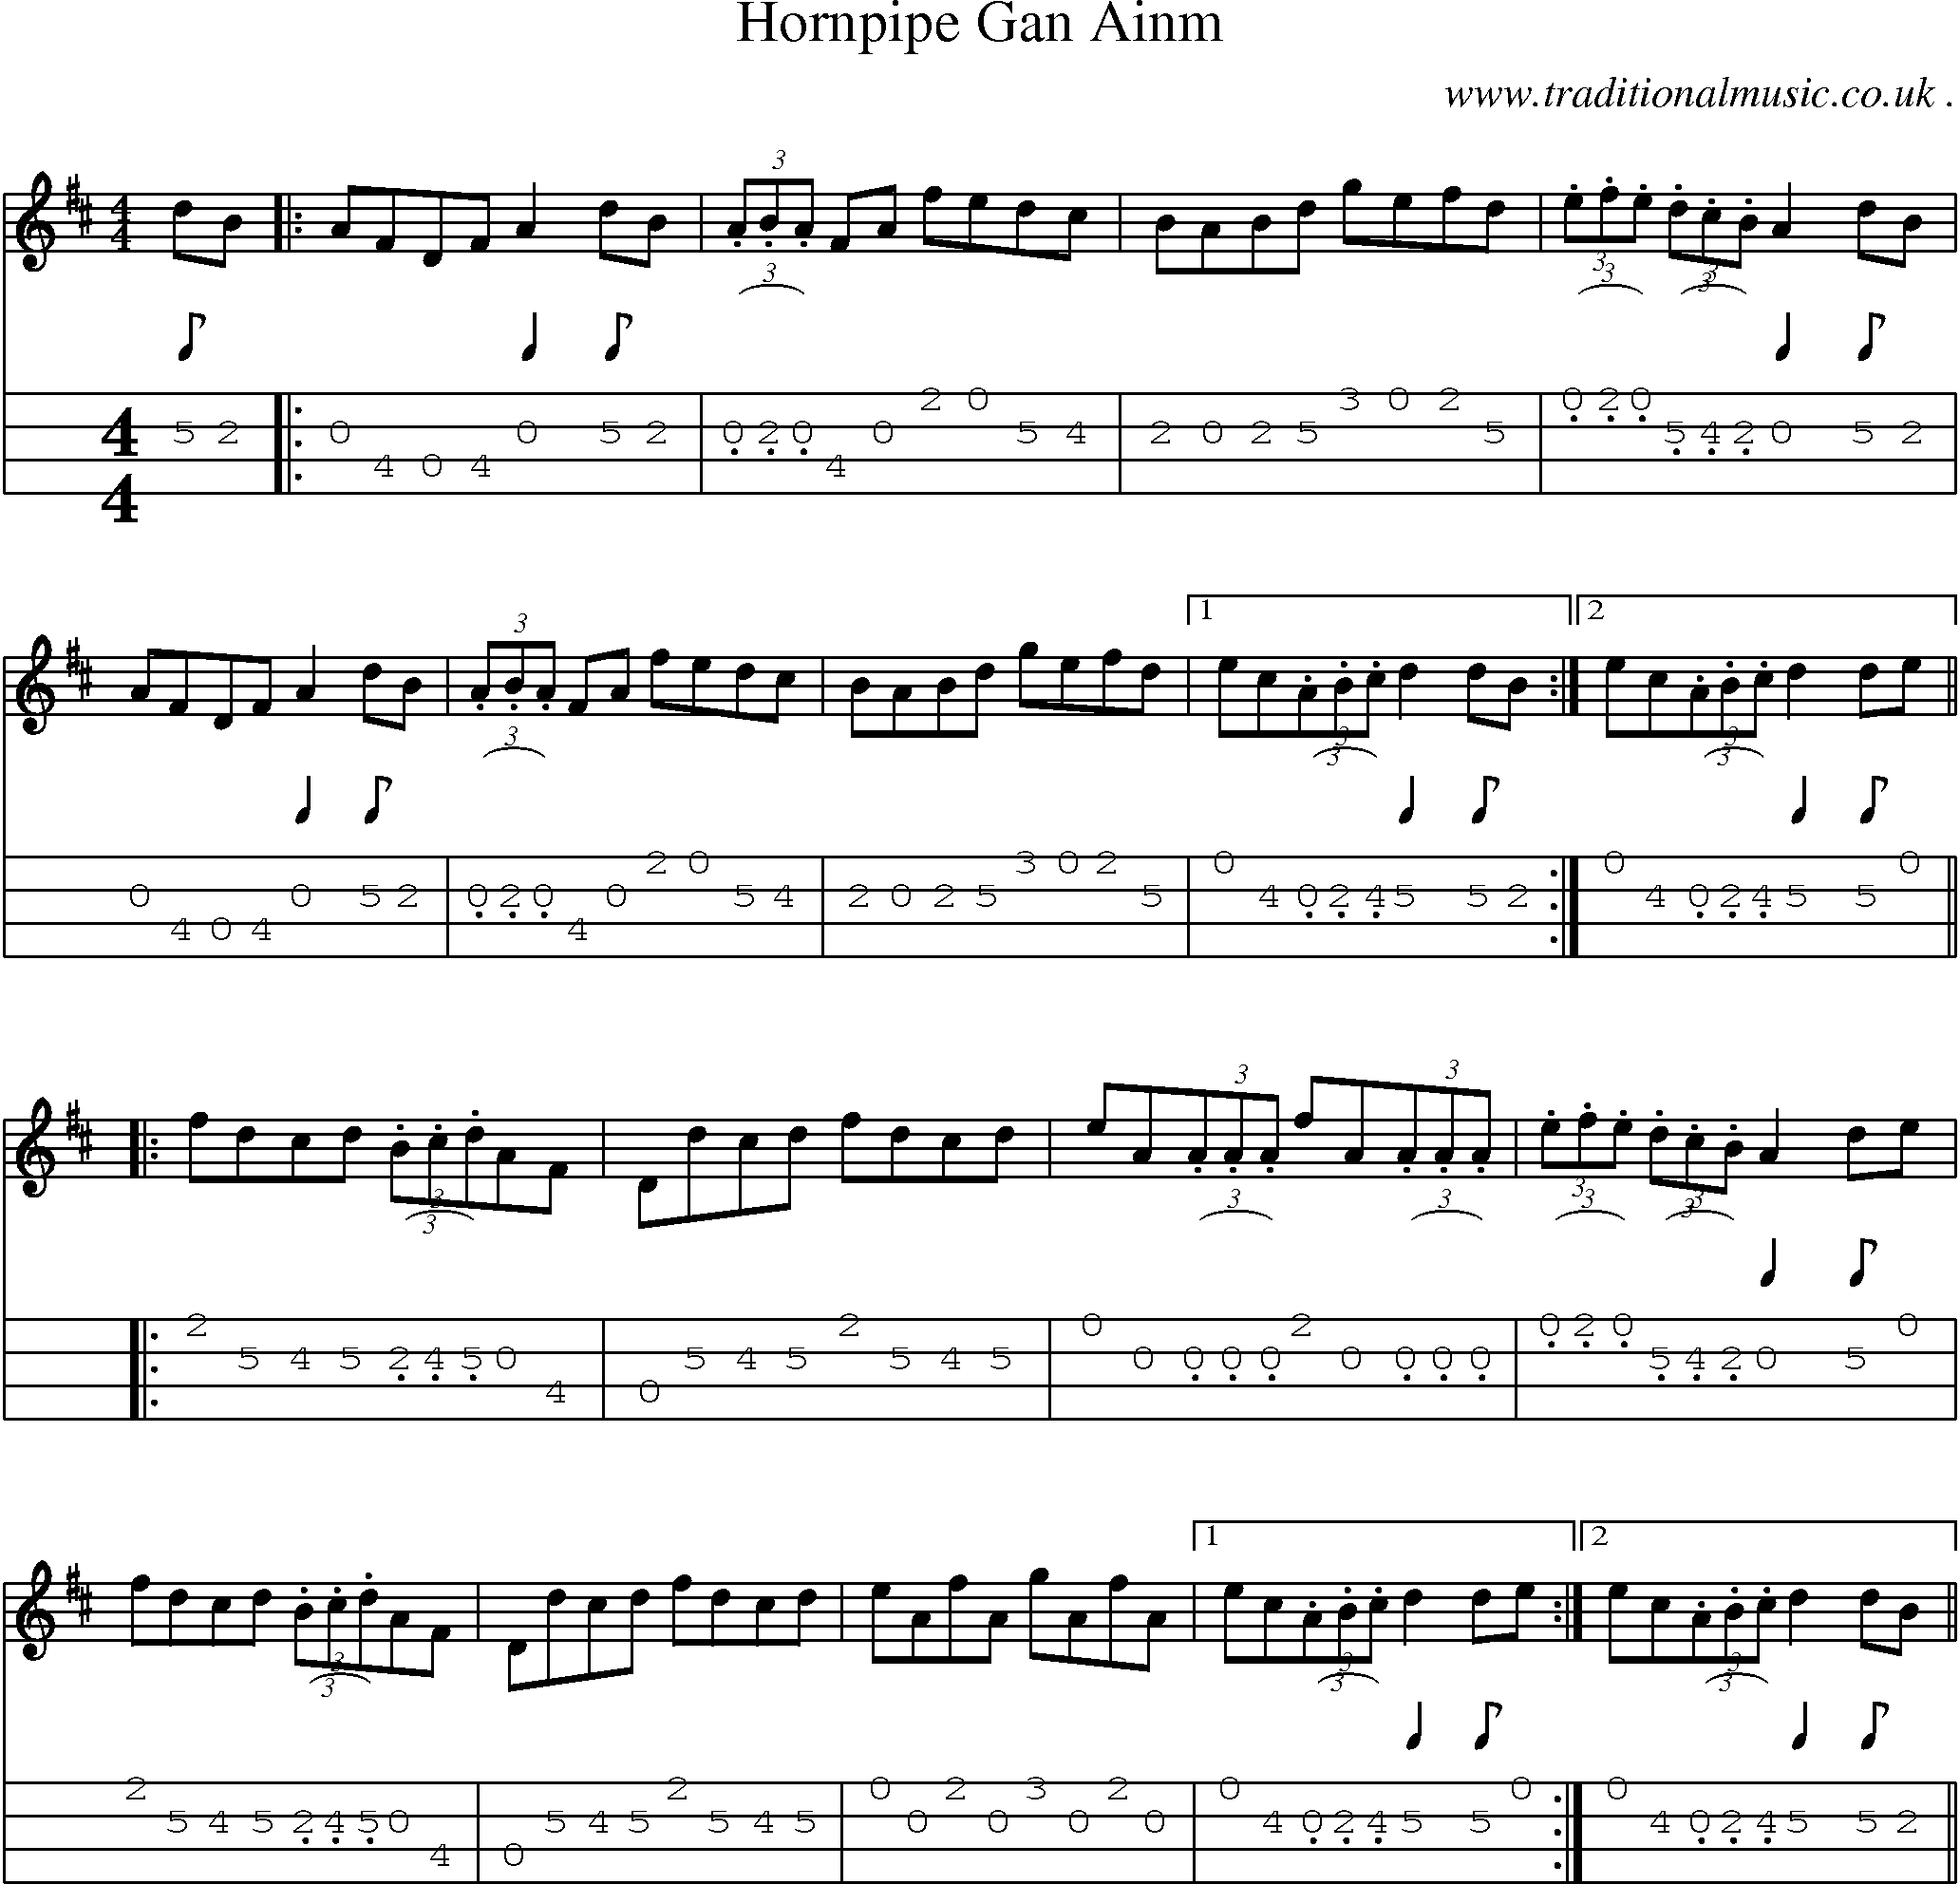 Sheet-Music and Mandolin Tabs for Hornpipe Gan Ainm